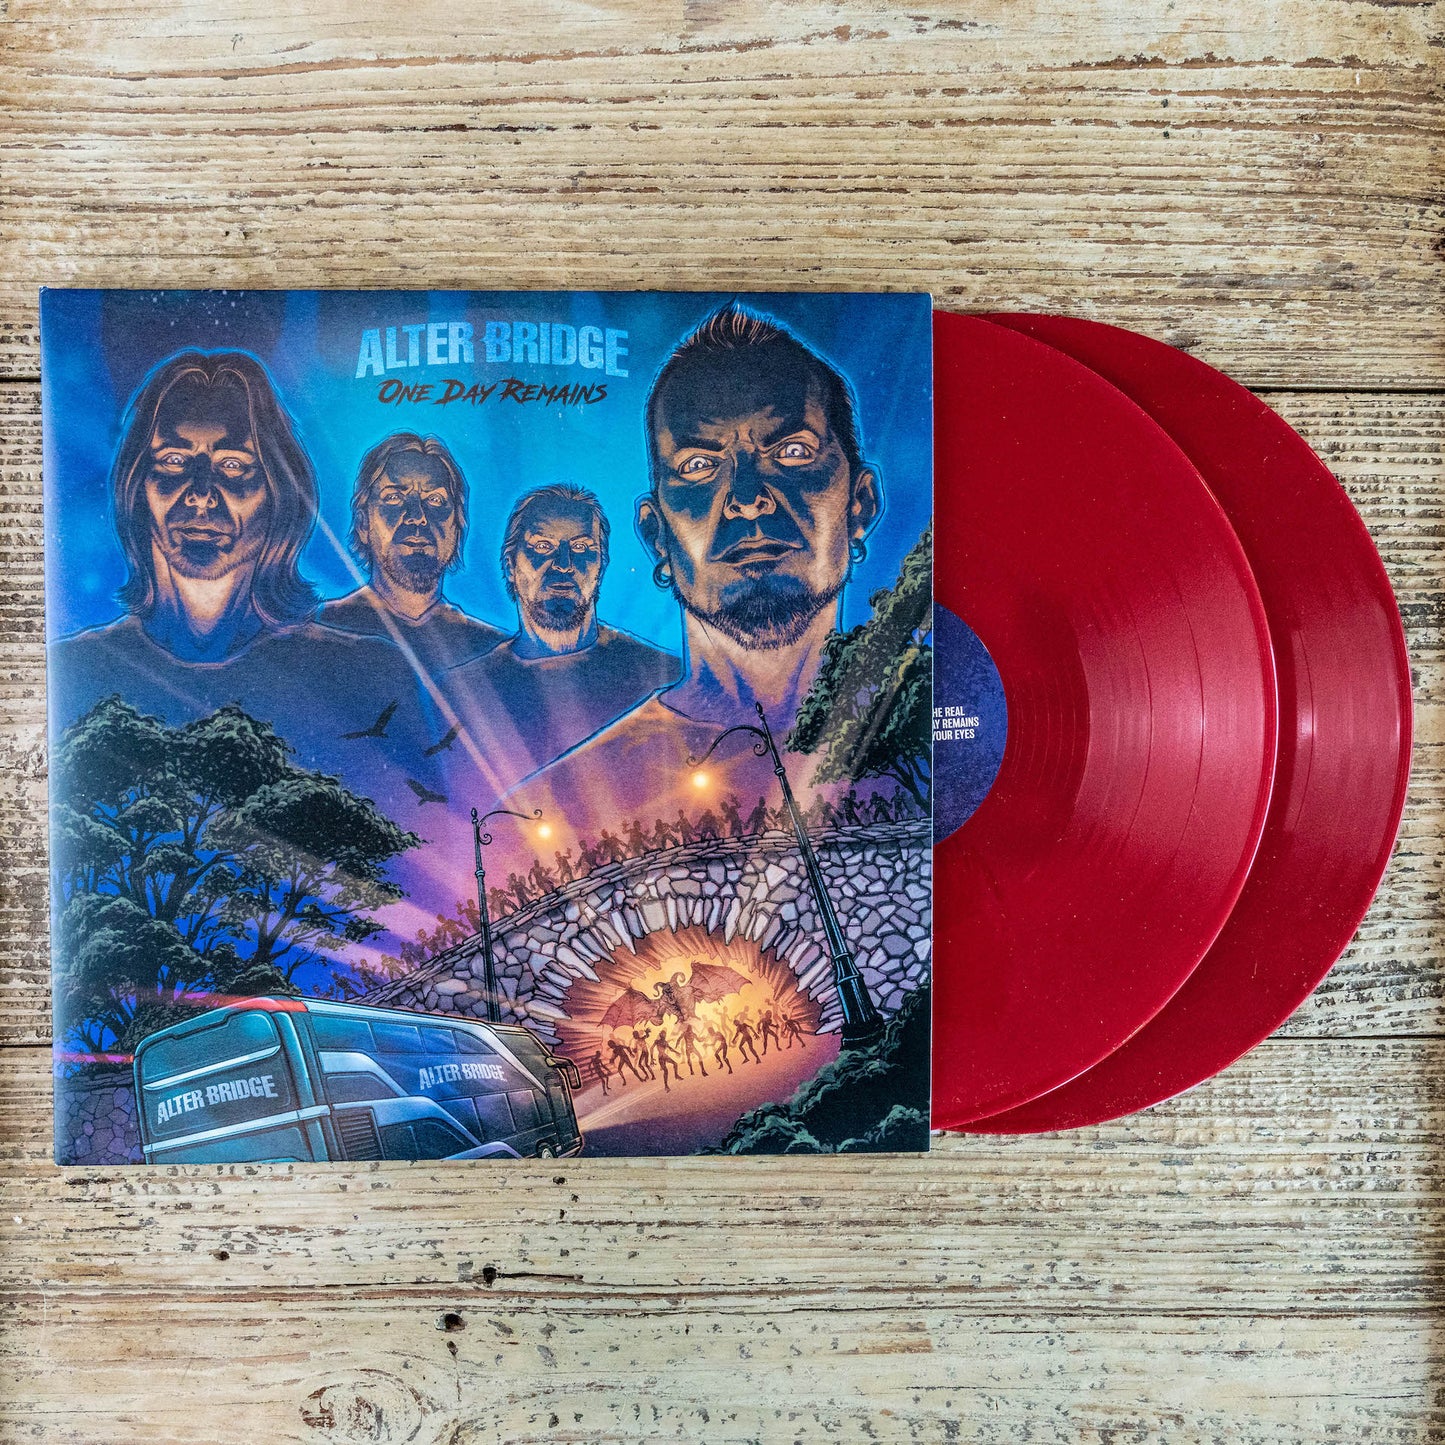 Alter Bridge - 'One Day Remains' in Red Colorway Vinyl